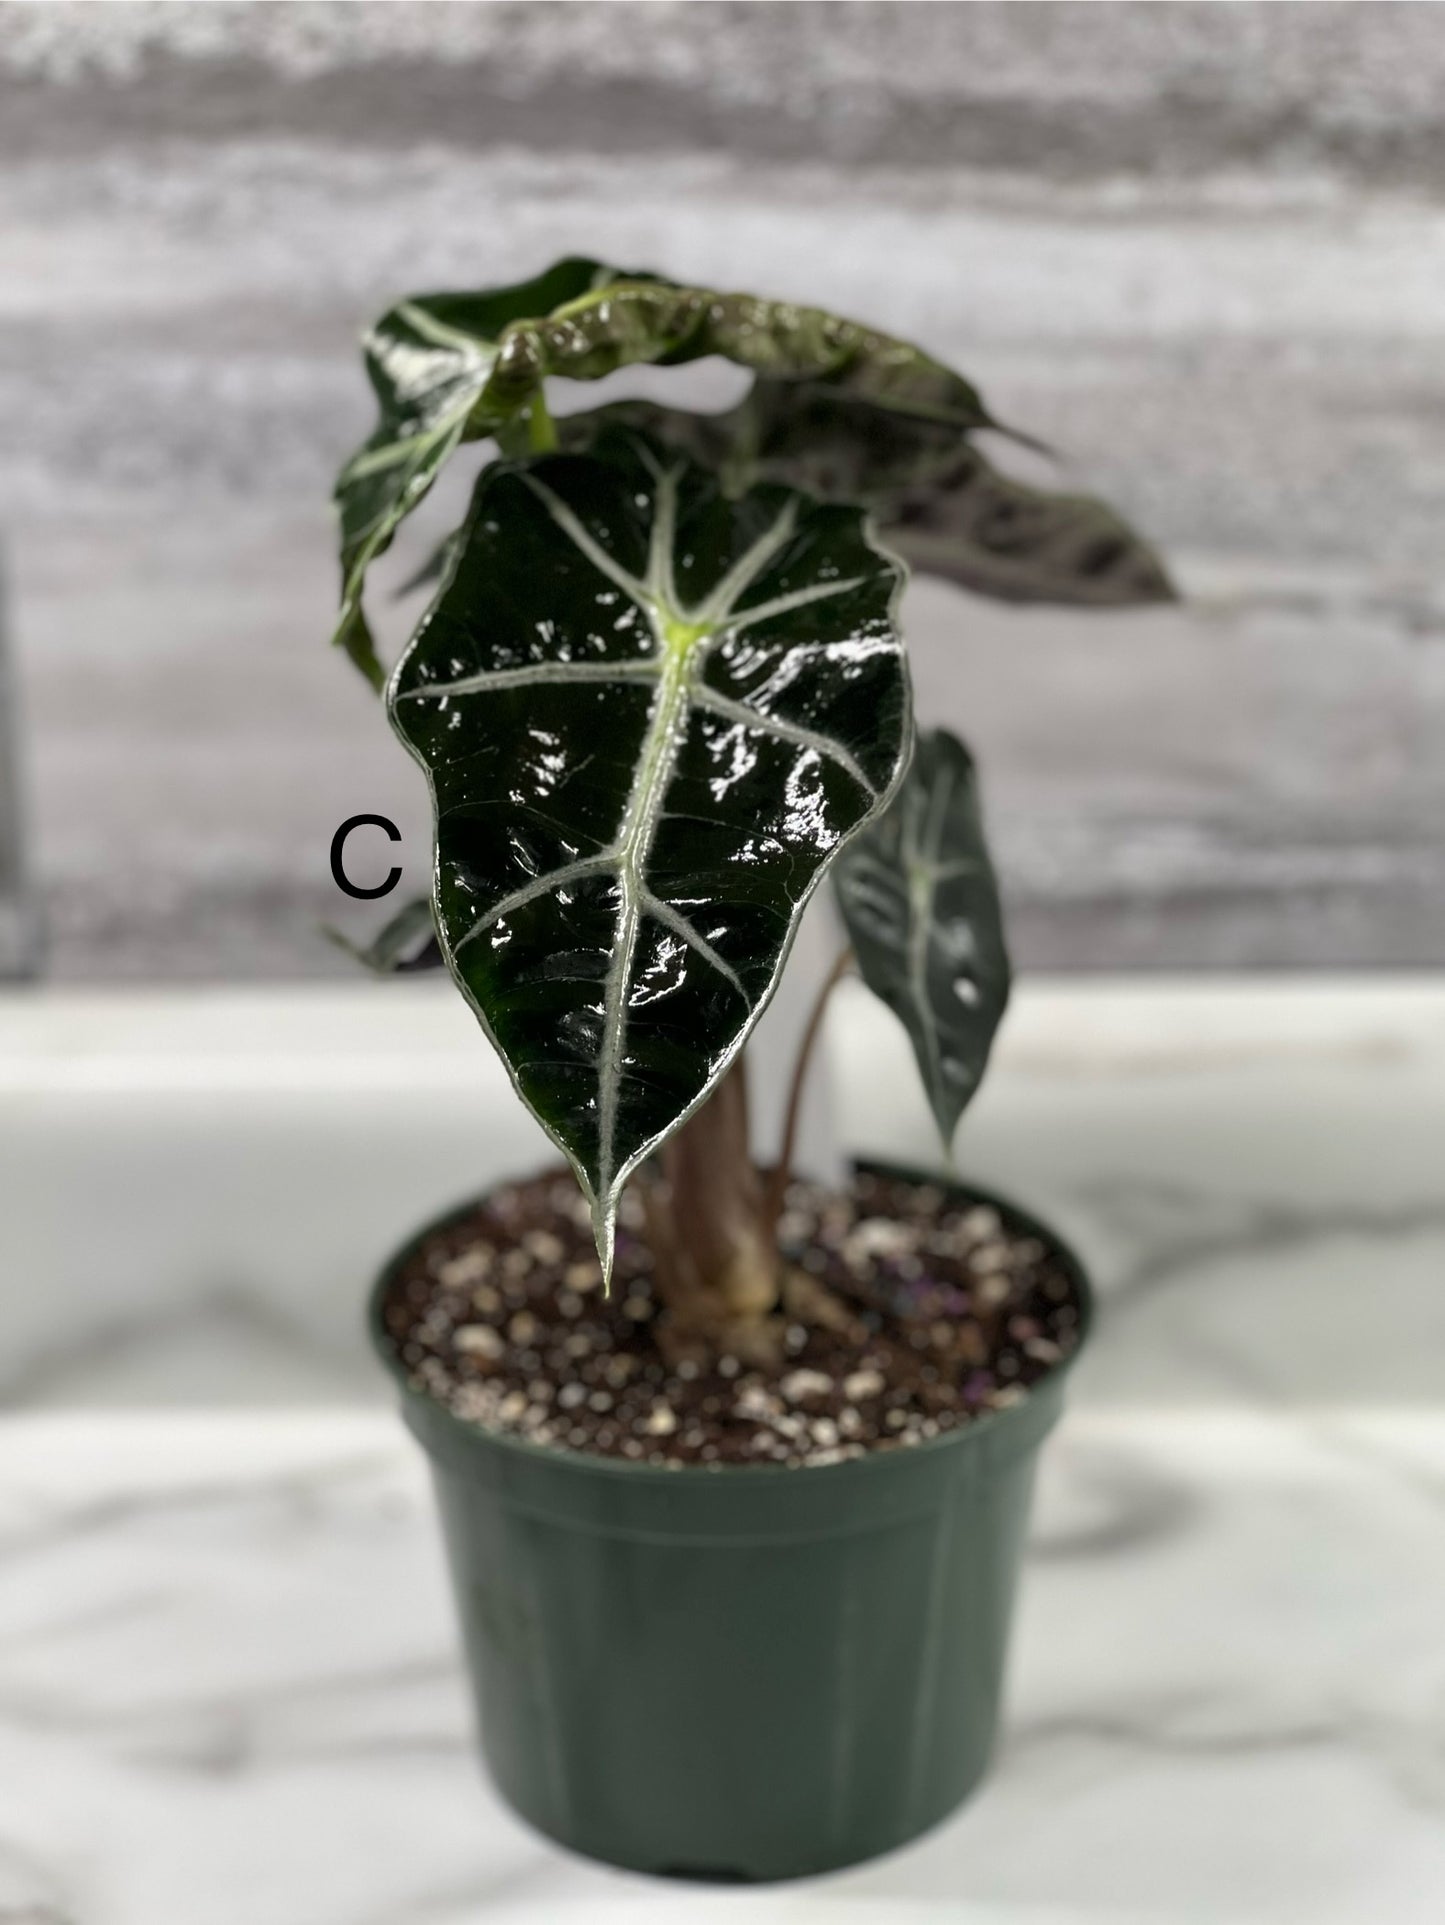 Alocasia “Polly” 5” pot *Pickup ONLY